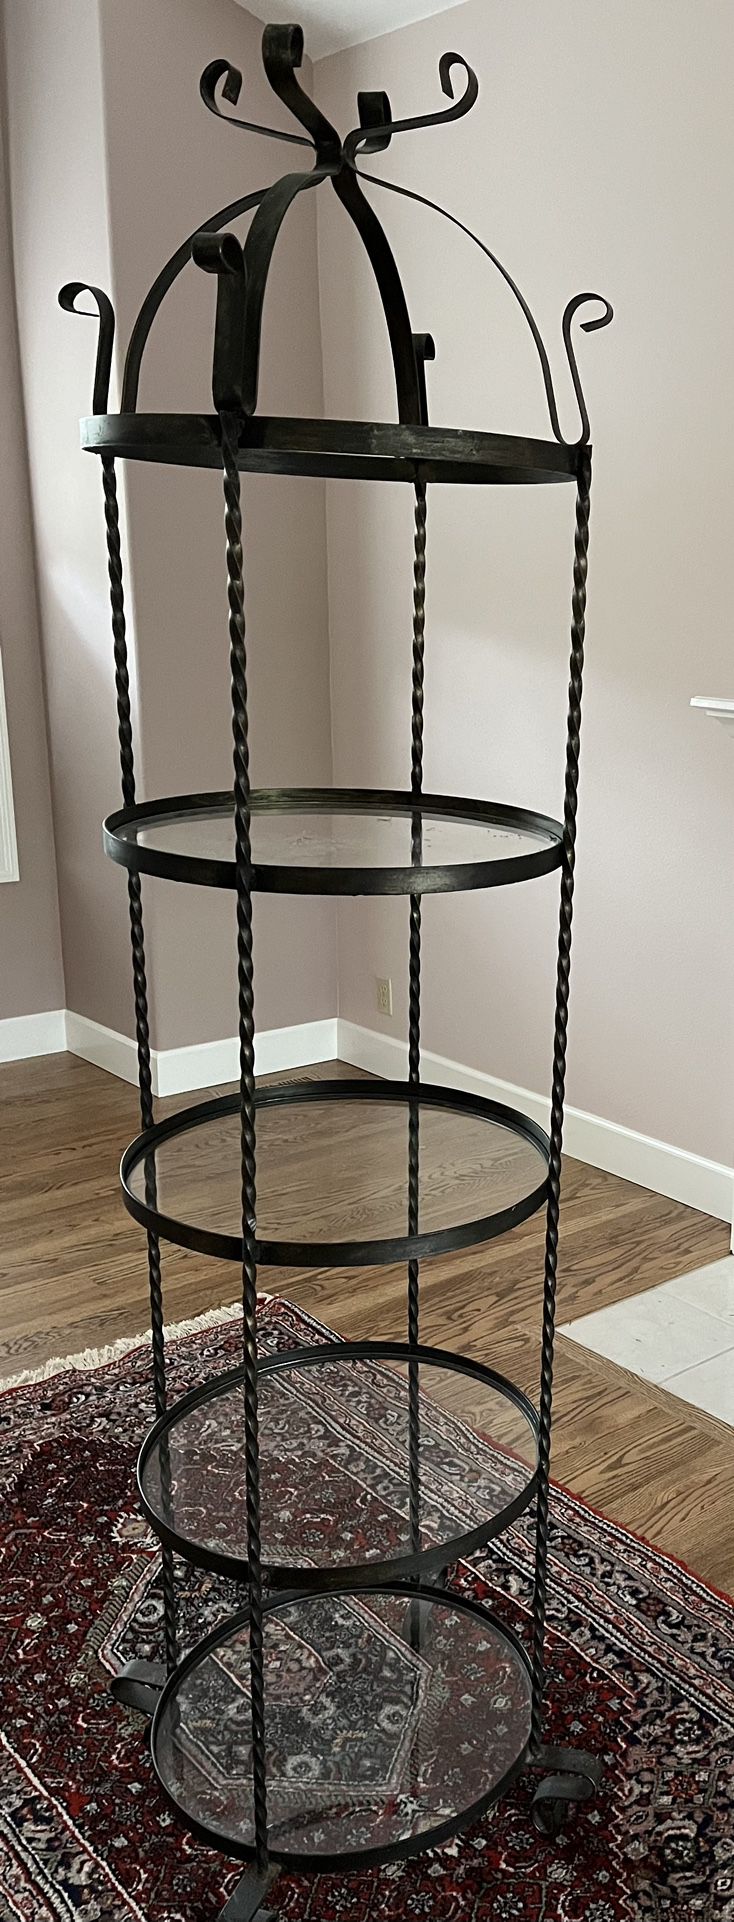 Black Wrought Iron Twisted Legs With Four Round Glass Shelves